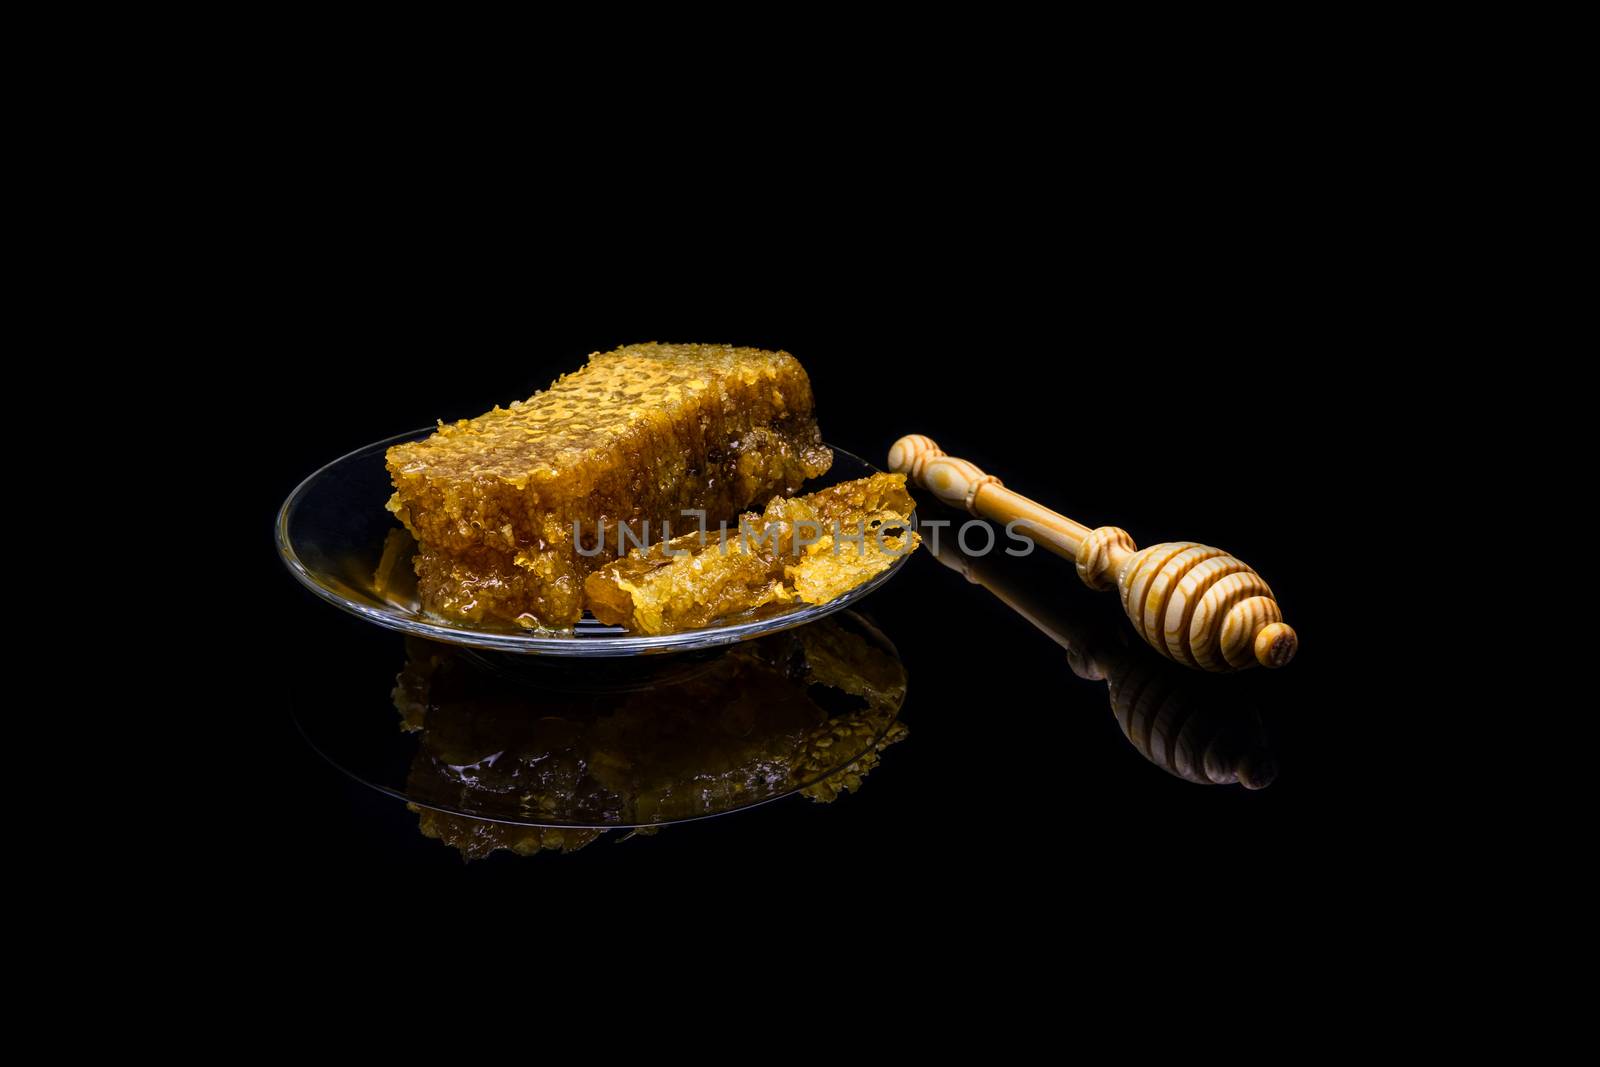 Honey with honeycombs on a glass plate on a black background